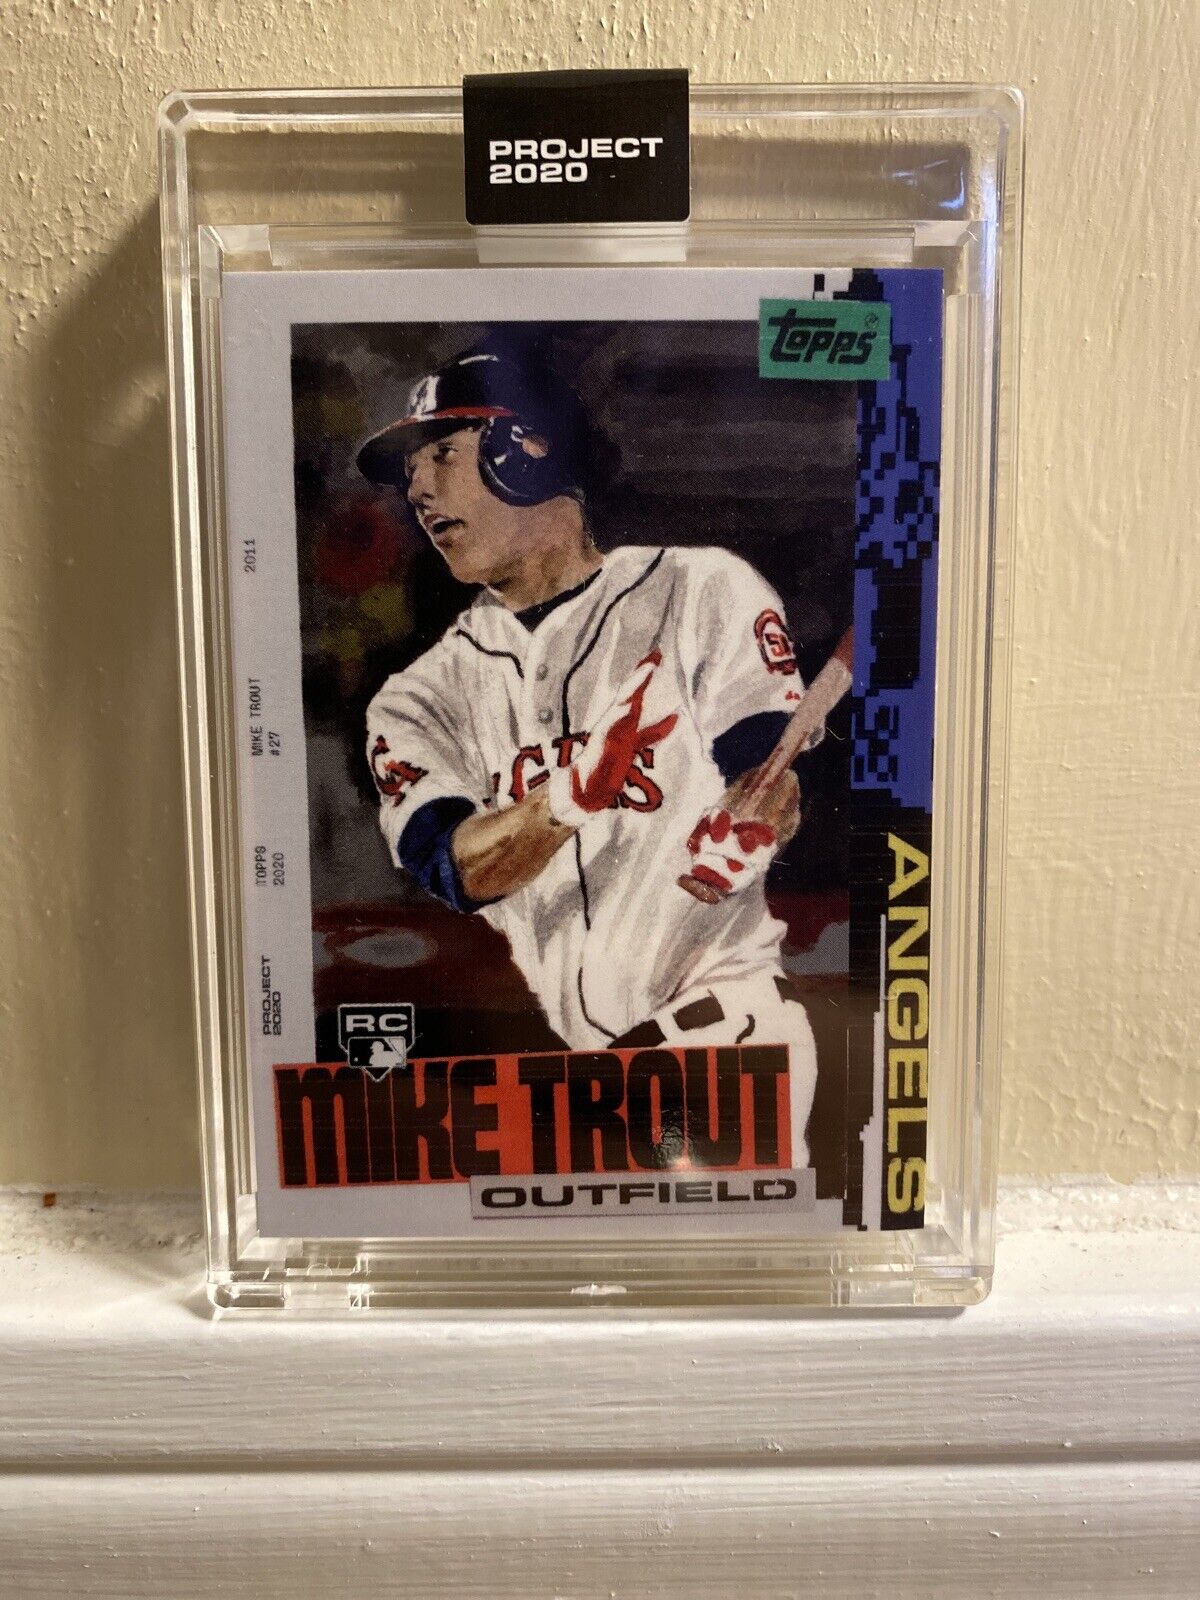 SALE／92%OFF】 トレーディングカード Topps Project 2020 Mike Trout 